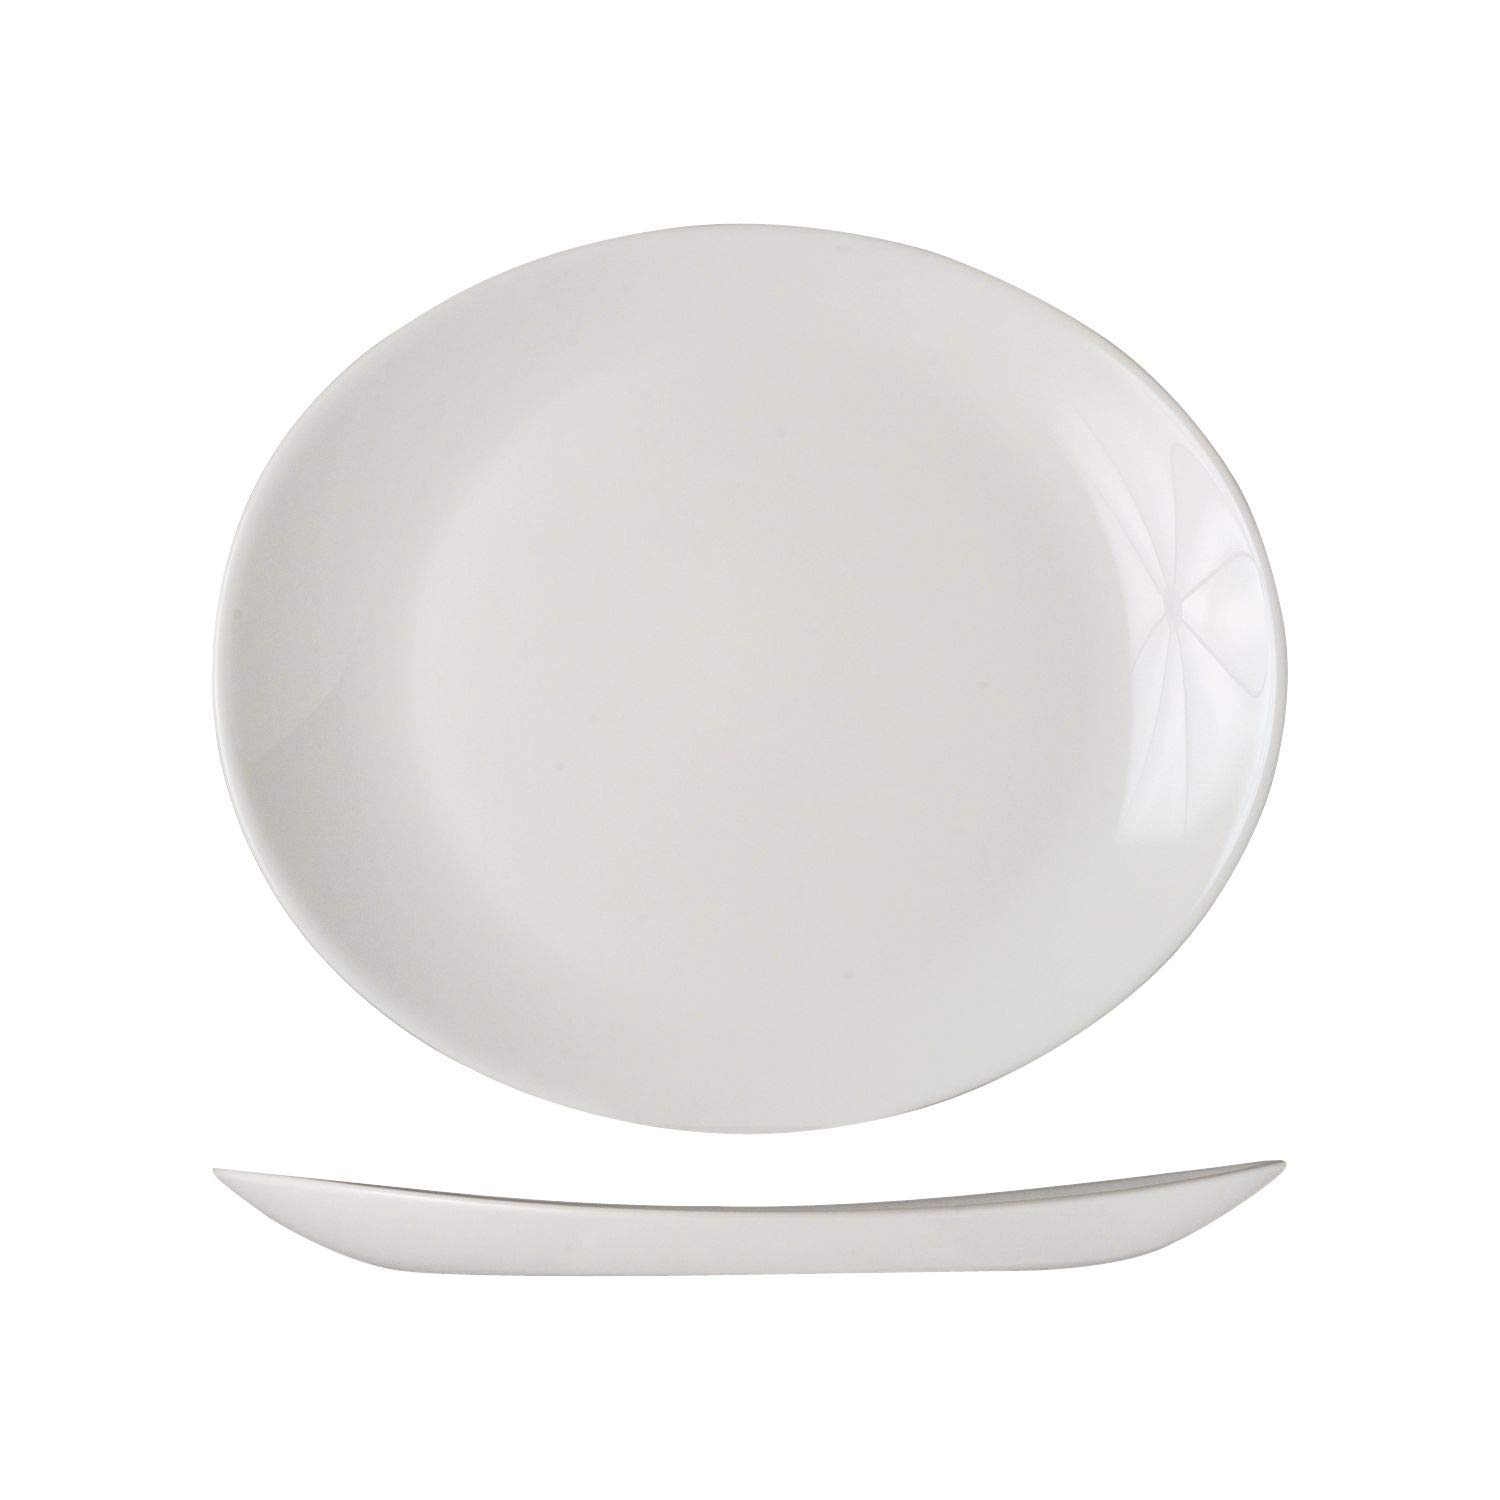 Arcoroc Hotel Erie Blanc Oval Plate White – Length: 300 mm x Width 260 mm Opal Glass – Pack of 6